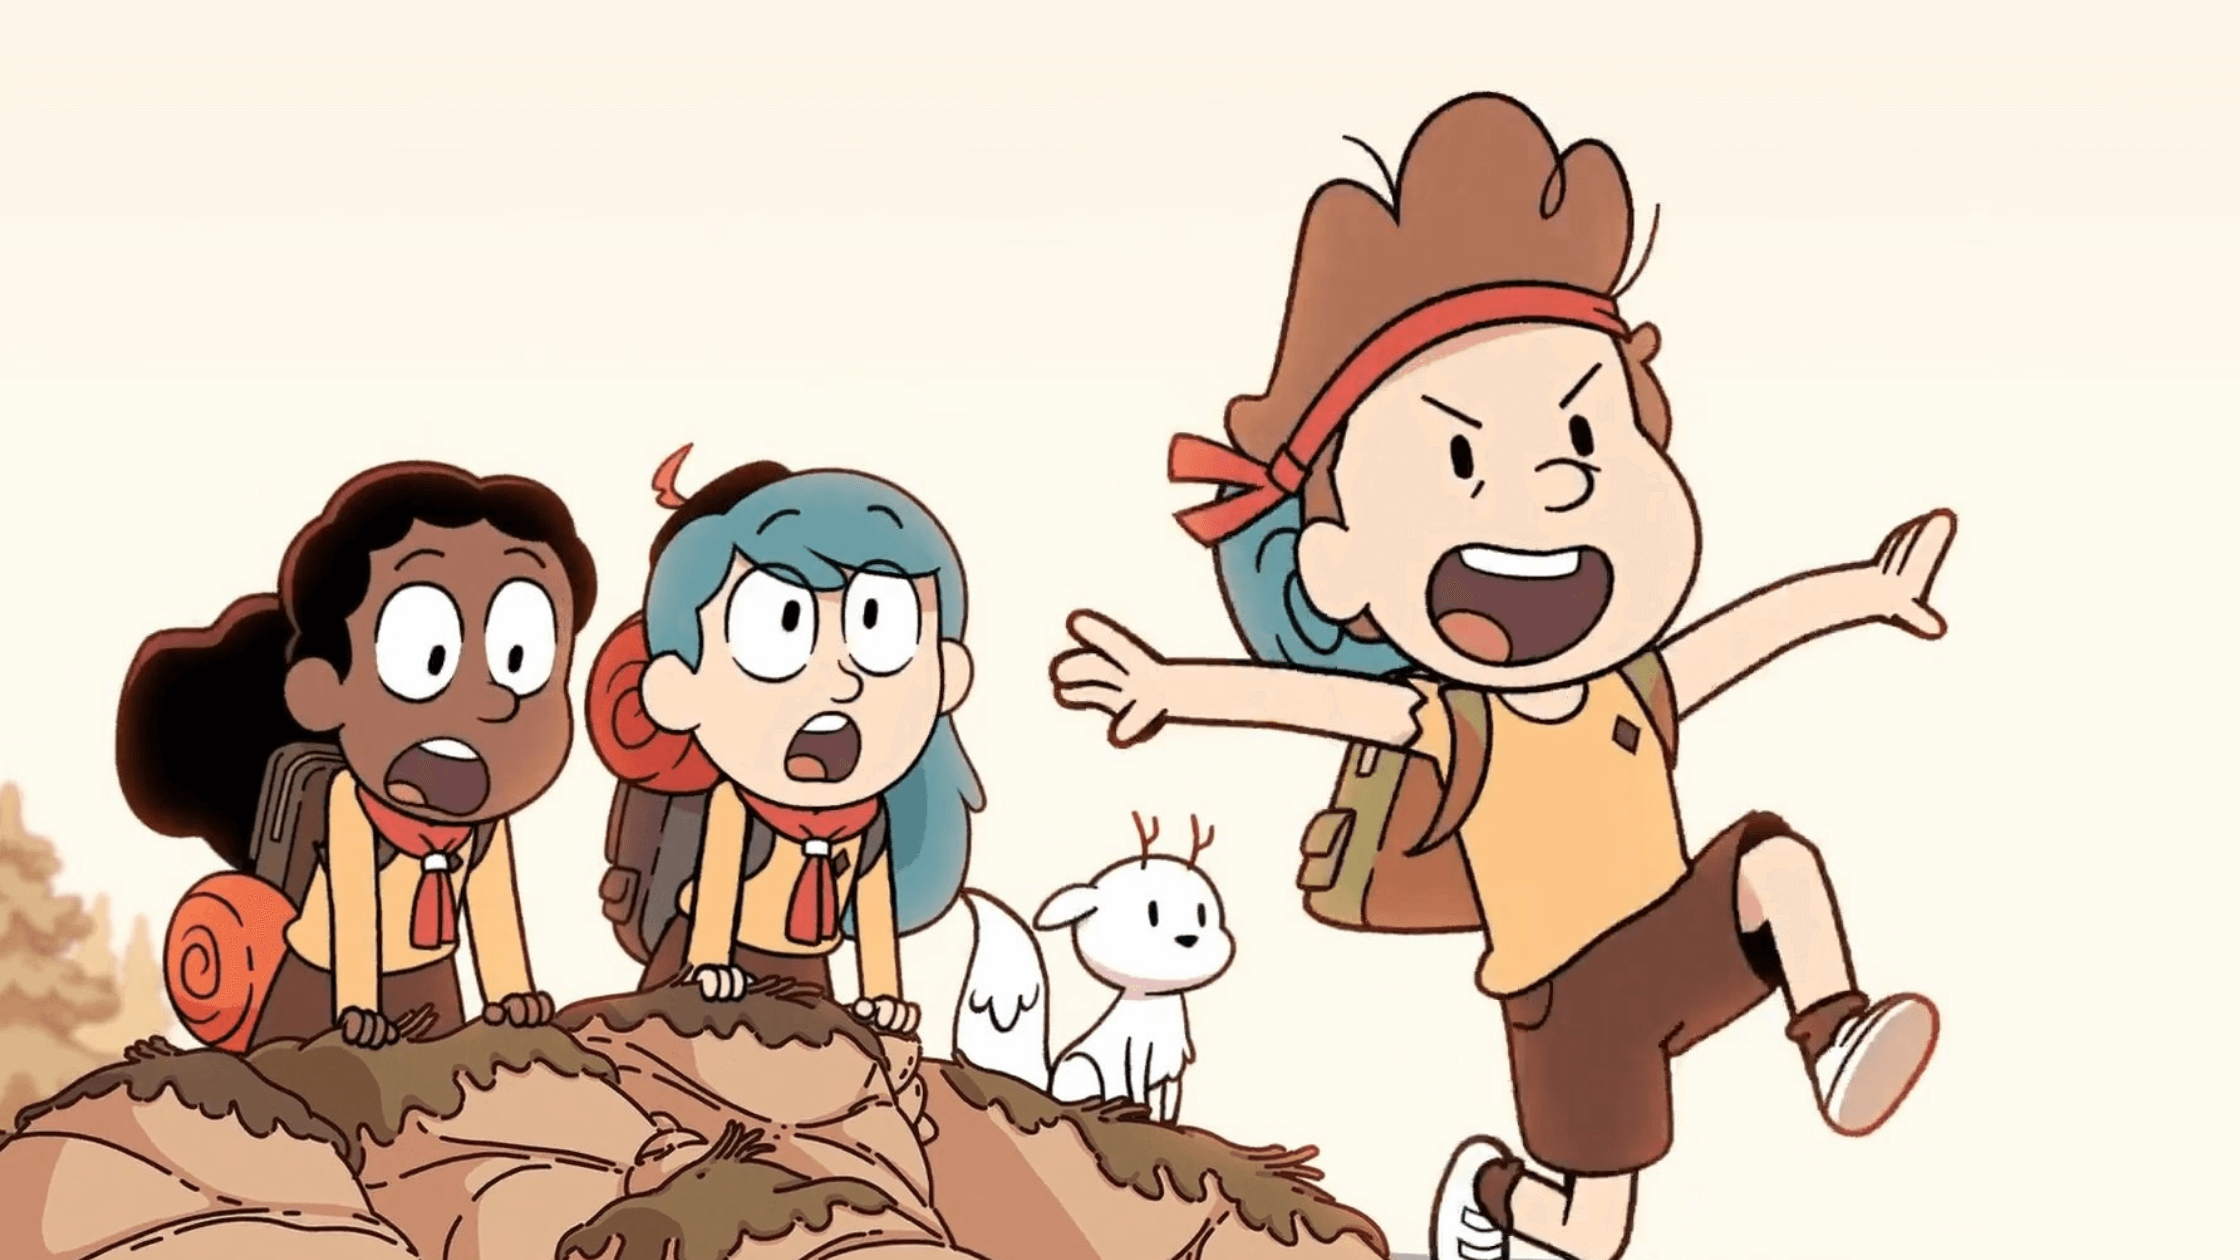 The Hilda Season 3 Renewal Is Official! Here's Everything We Know